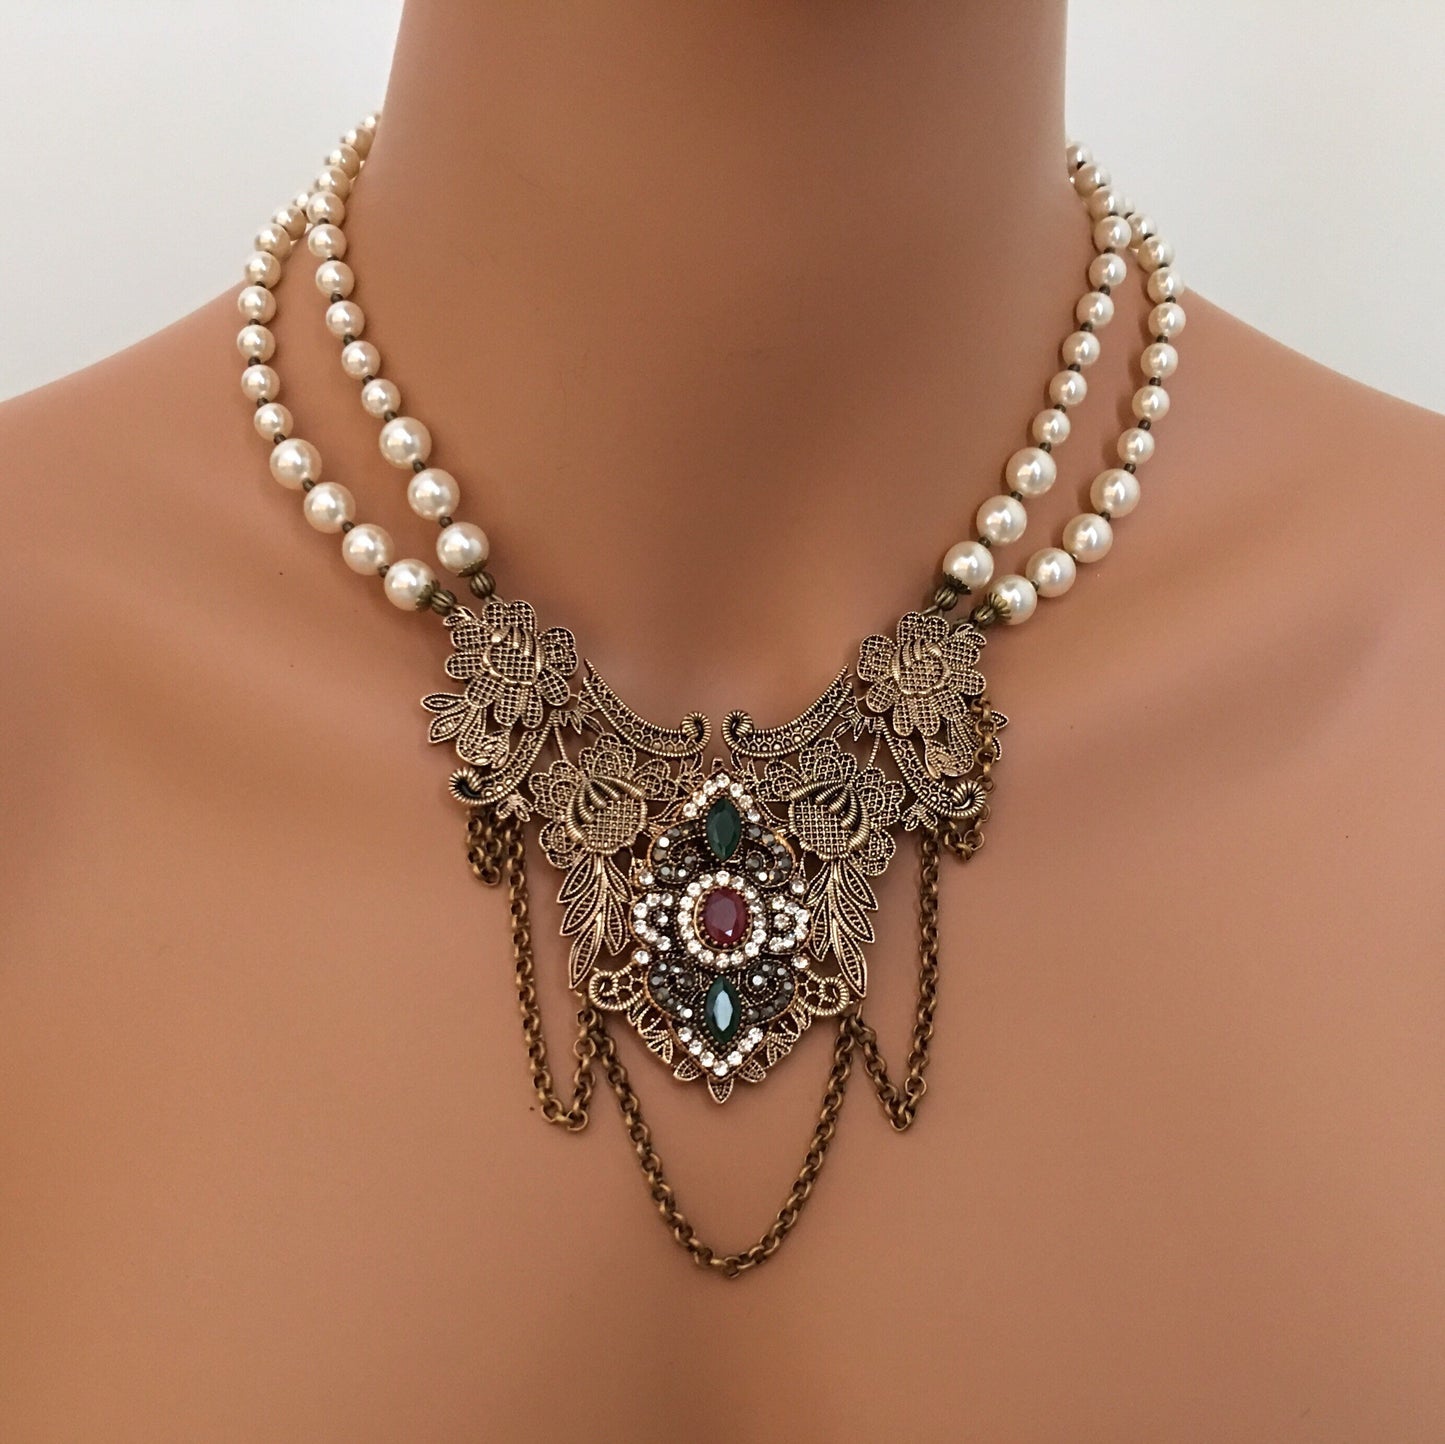 Victorian Necklace Set Vintage style with Earrings antique bronze gold cream ivory crystal pearls Rennaissance medieval historical costume